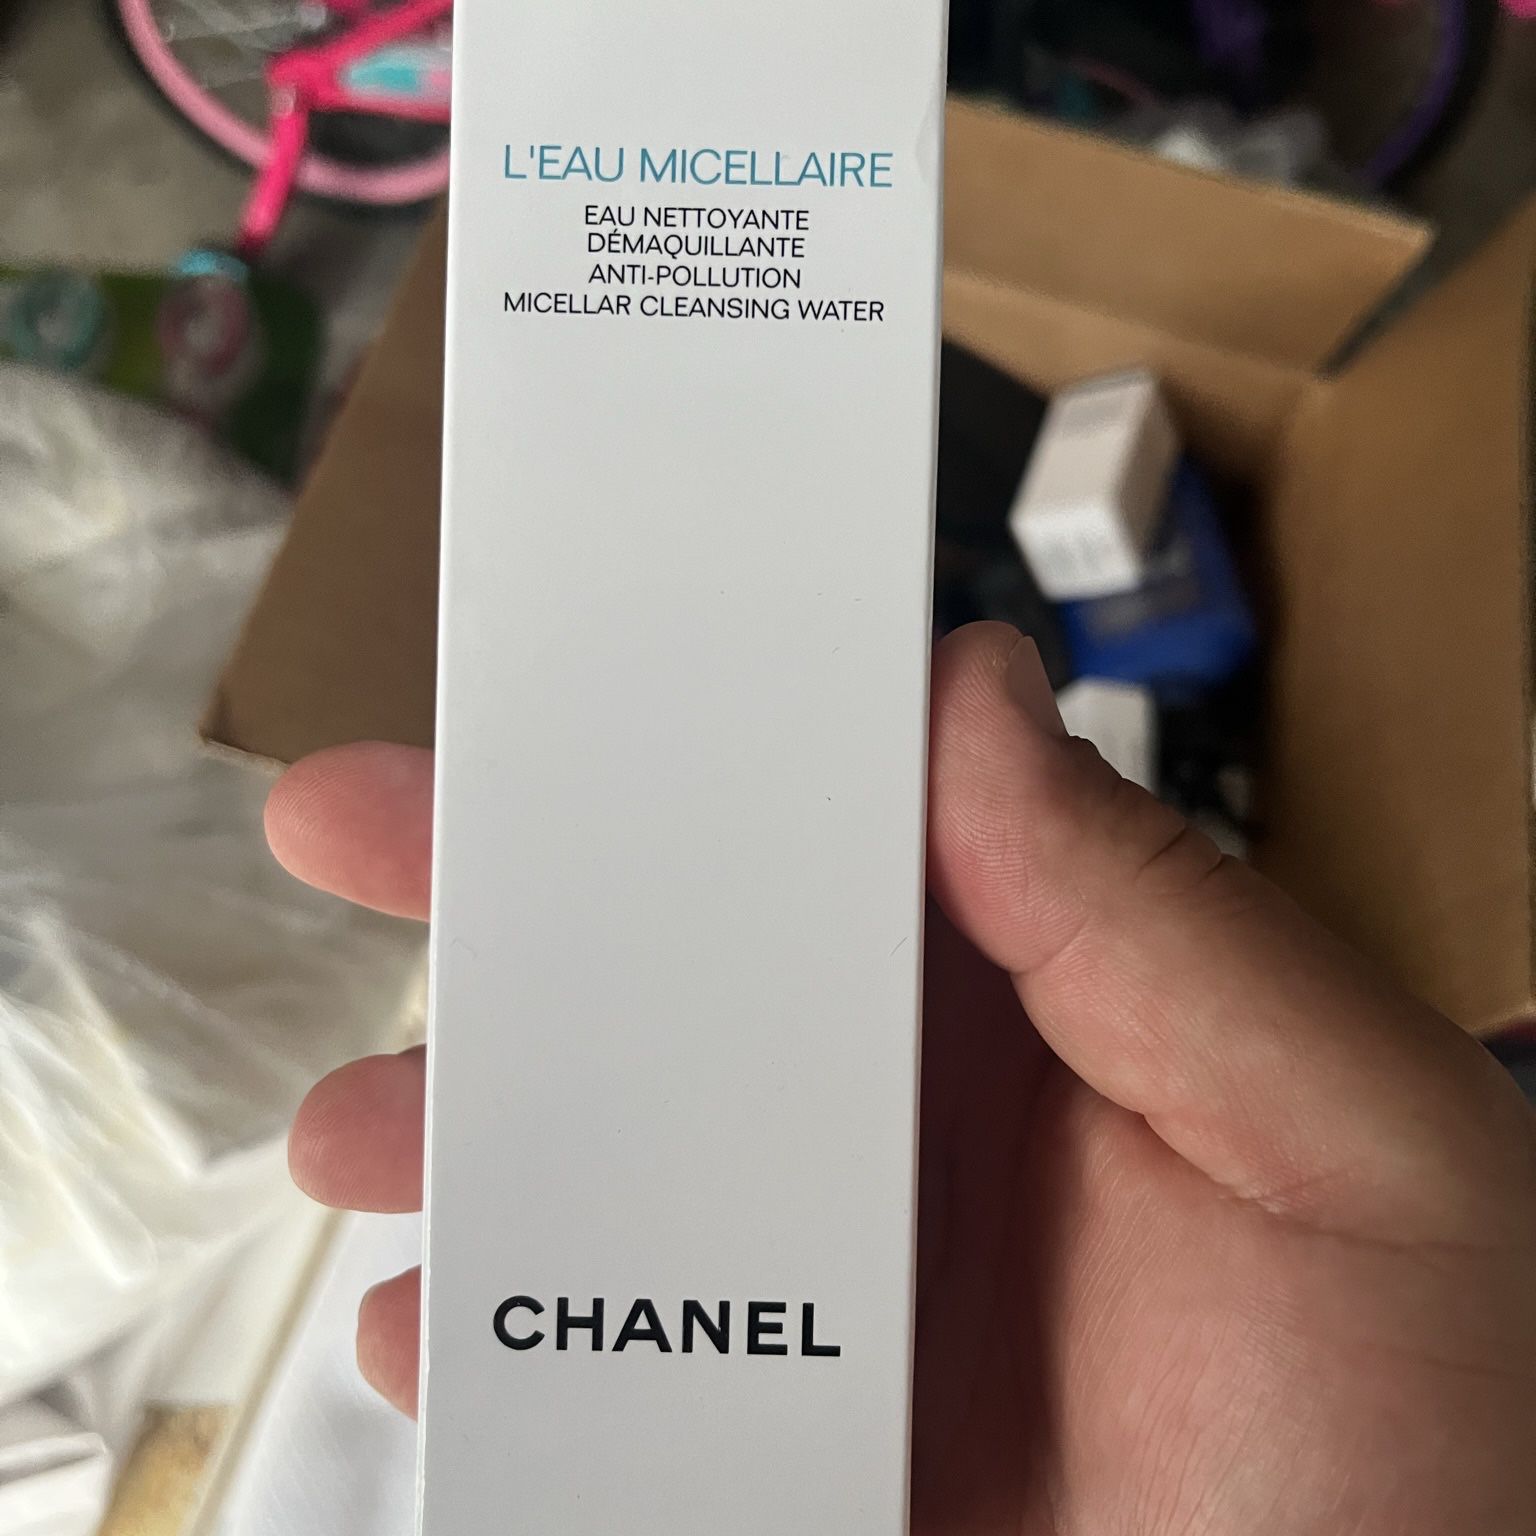 Lot of Chanel L'eau Micellaire Anti-Pollution Cleansing Water Travel Size  0.34 fl.oz.